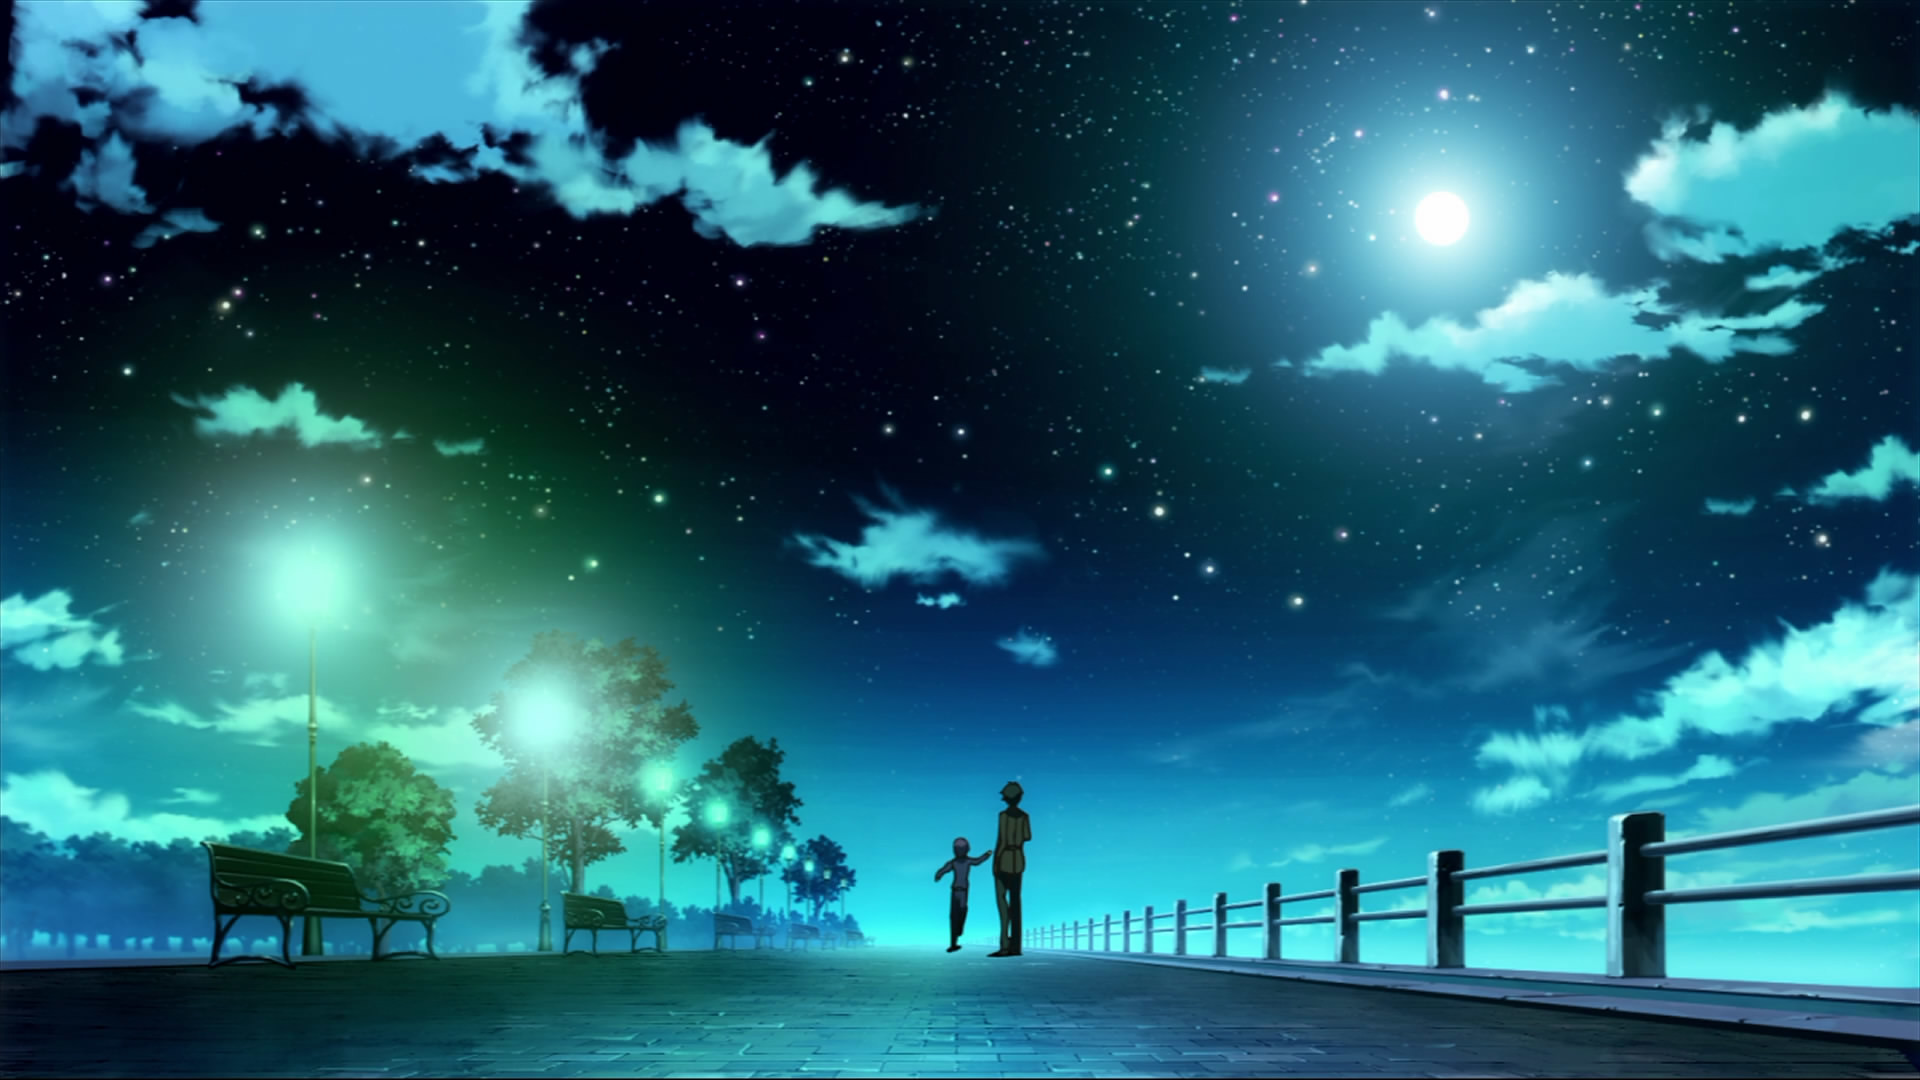 1920x1080 Search Results for “anime night sky wallpaper hd” – Adorable Wallpapers